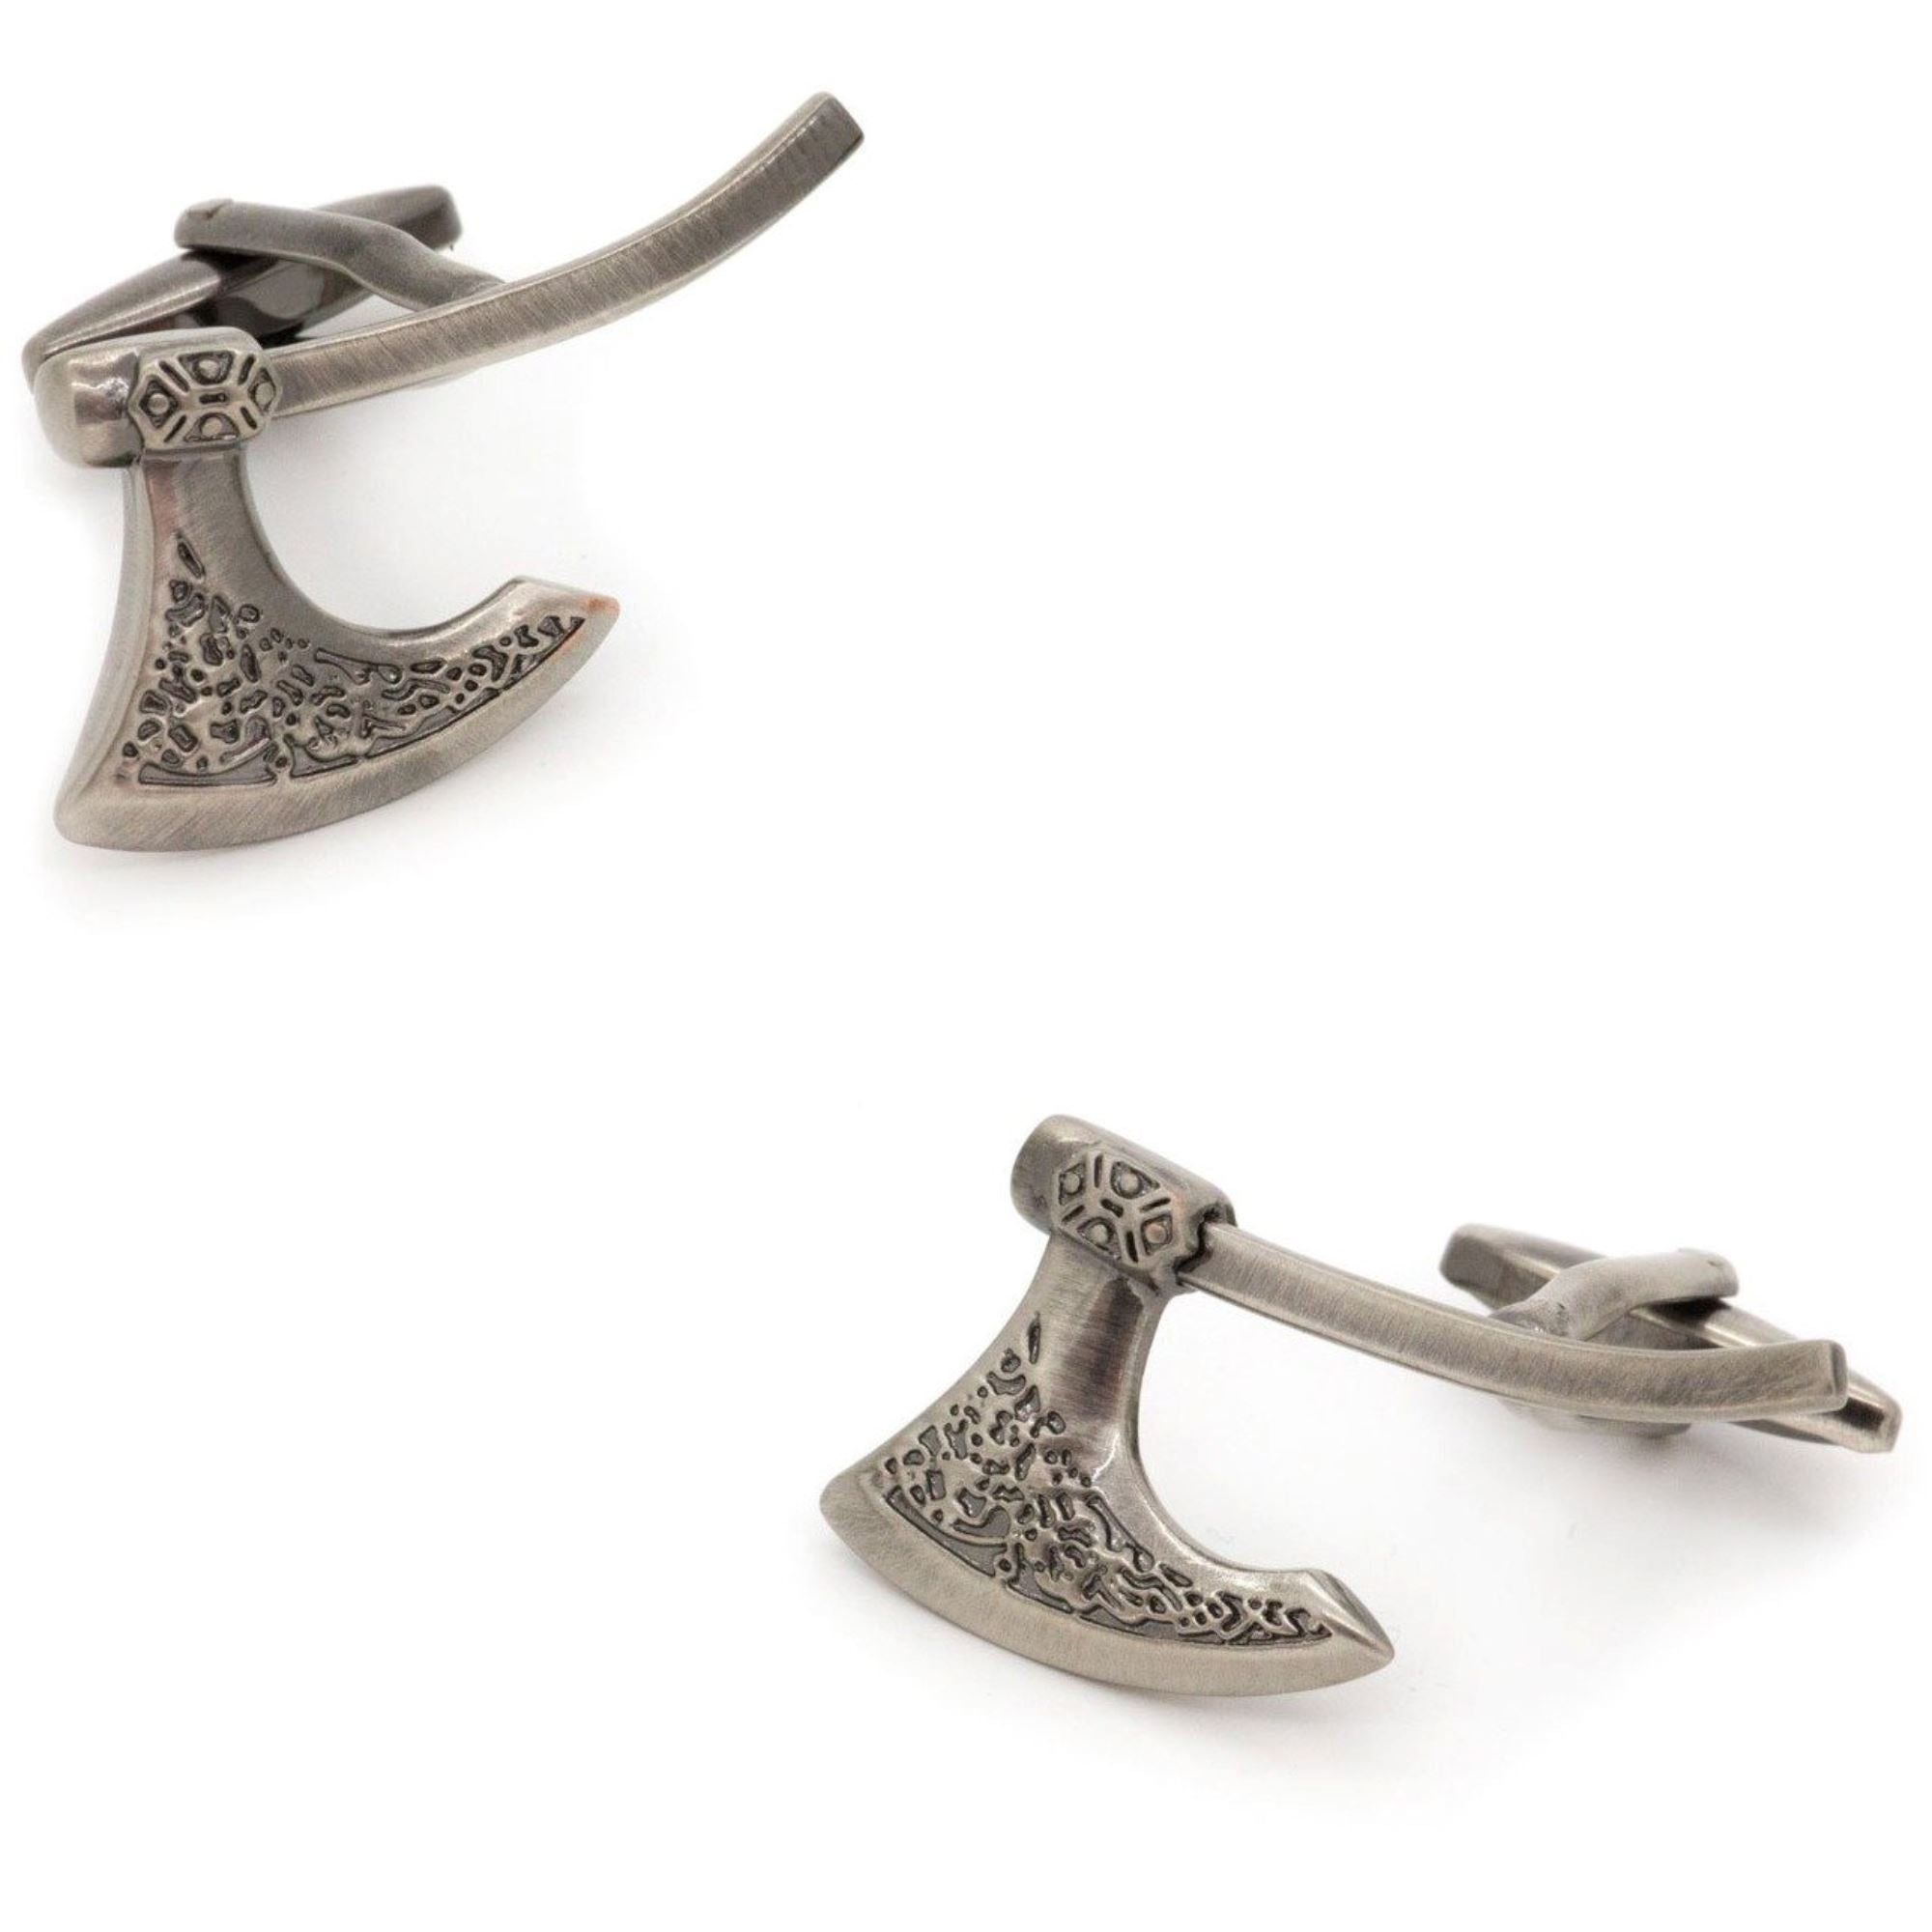 Medieval Axe Cufflinks in Burnished Silver Novelty Cufflinks Clinks Australia Medieval Axe Cufflinks in Burnished Silver 